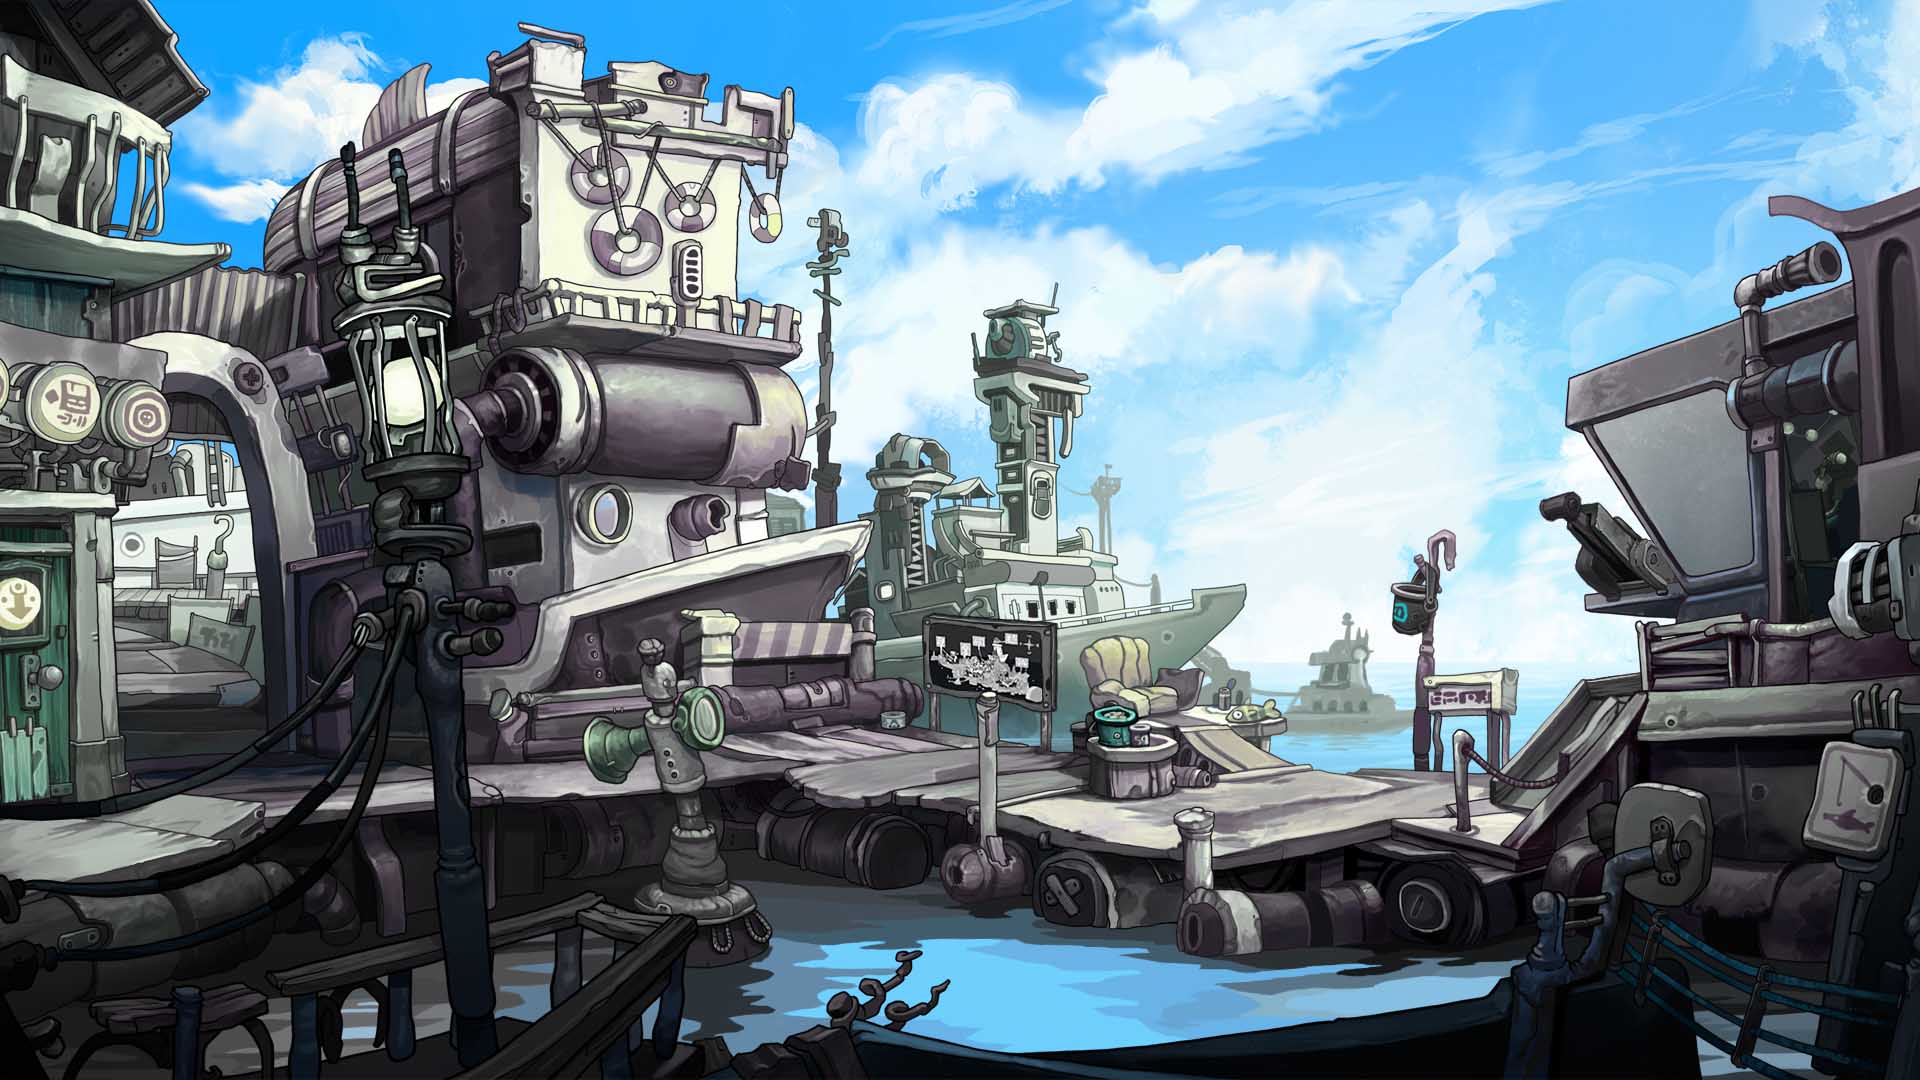 Chaos of deponia steam фото 105